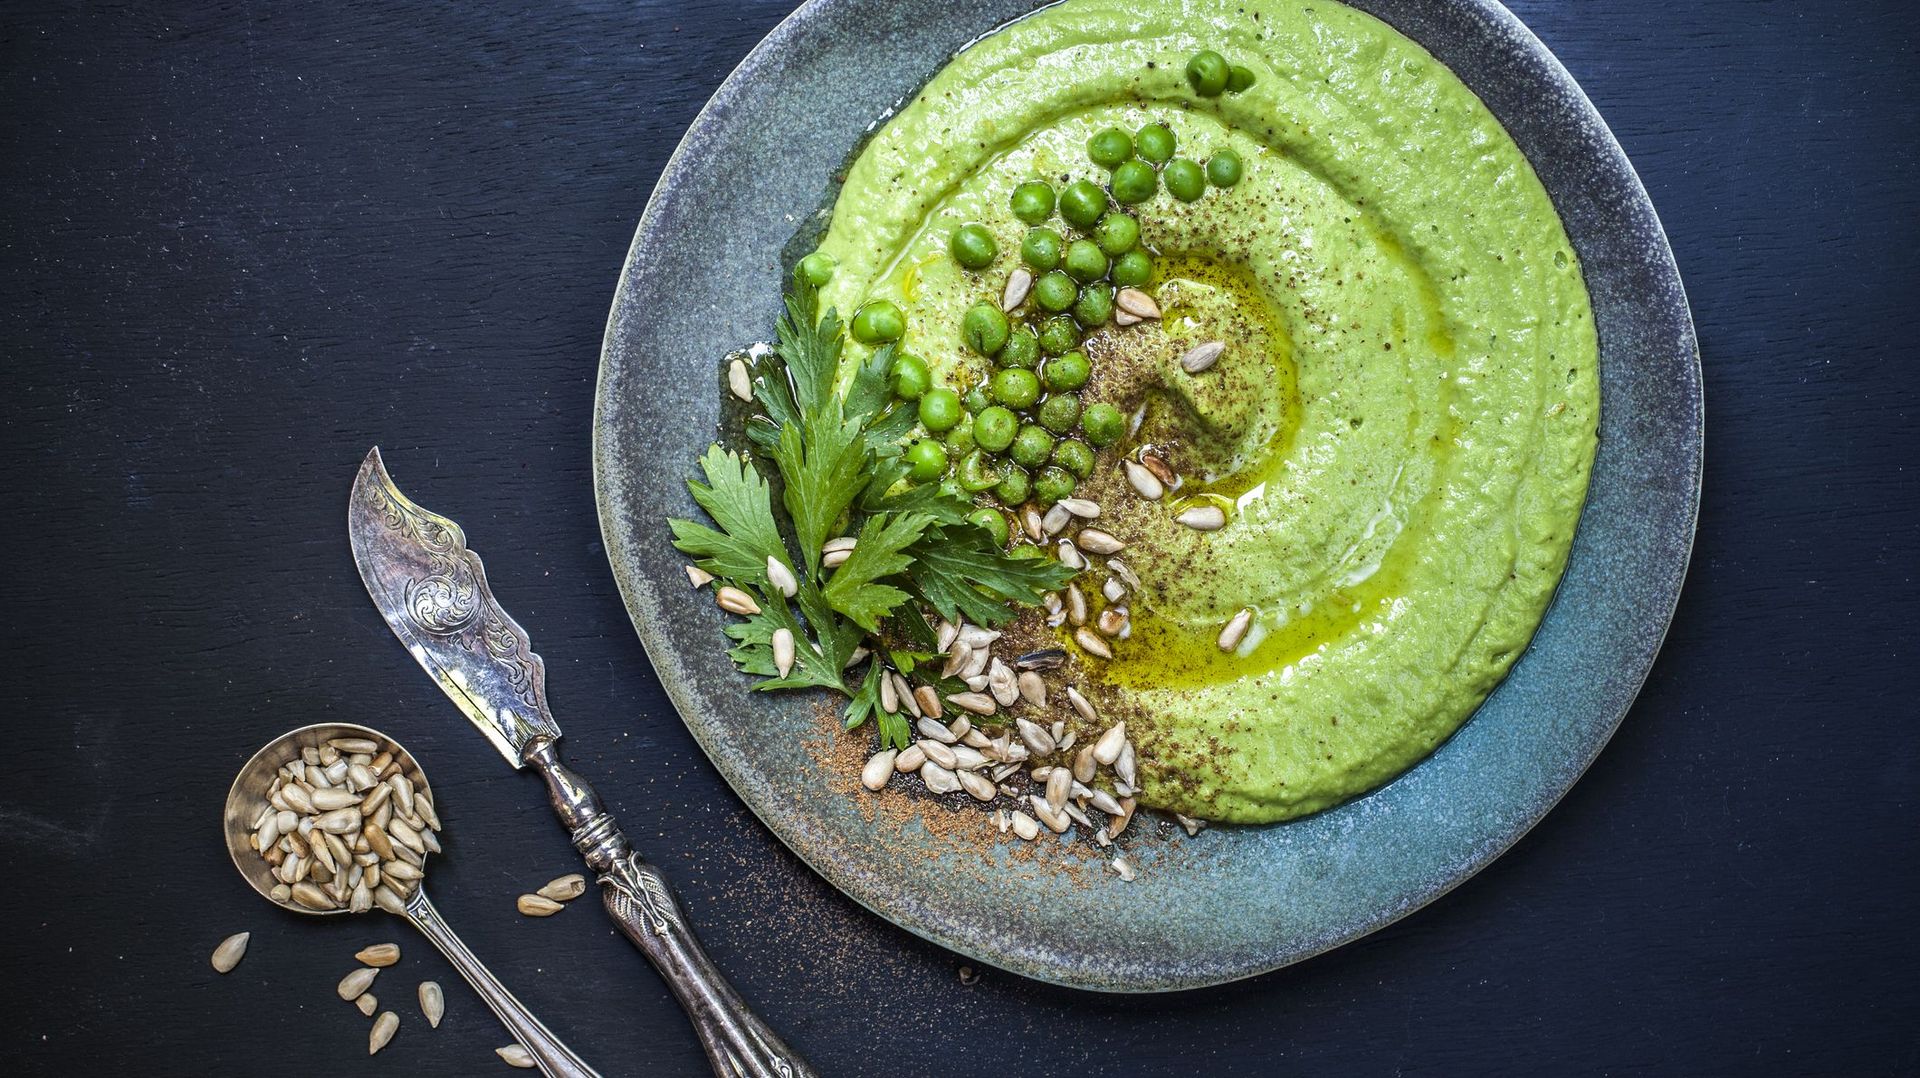 Green Hummus Plate with Antique Spoon and Knife